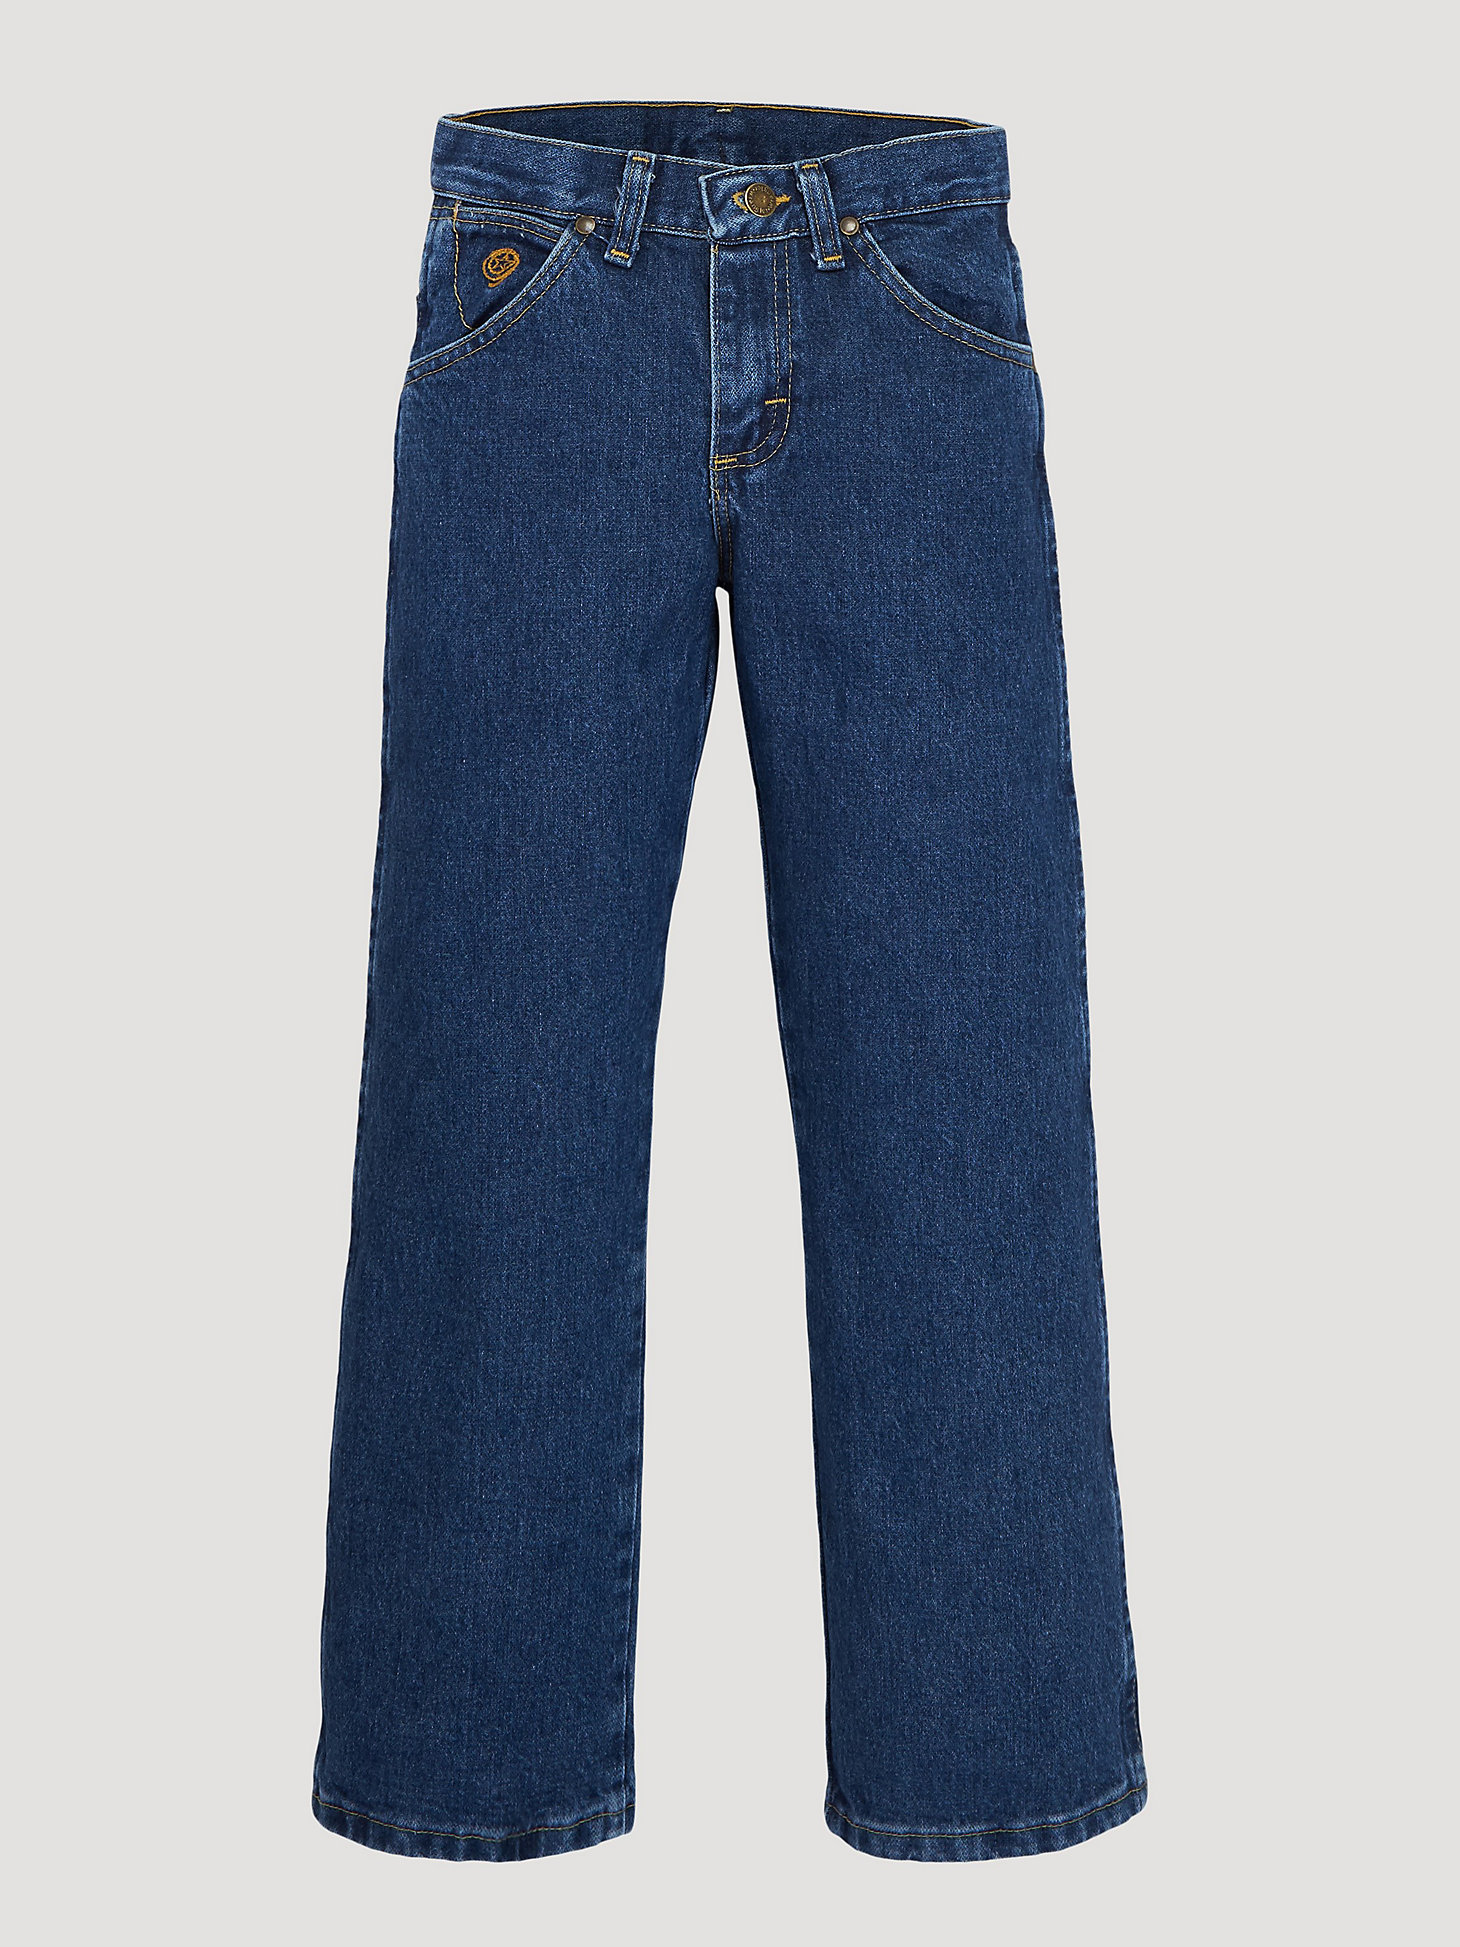 Boy's George Strait Cowboy Cut® Collection by Wrangler® Original Fit Jean (4-7) in Heavyweight Stone Denim main view